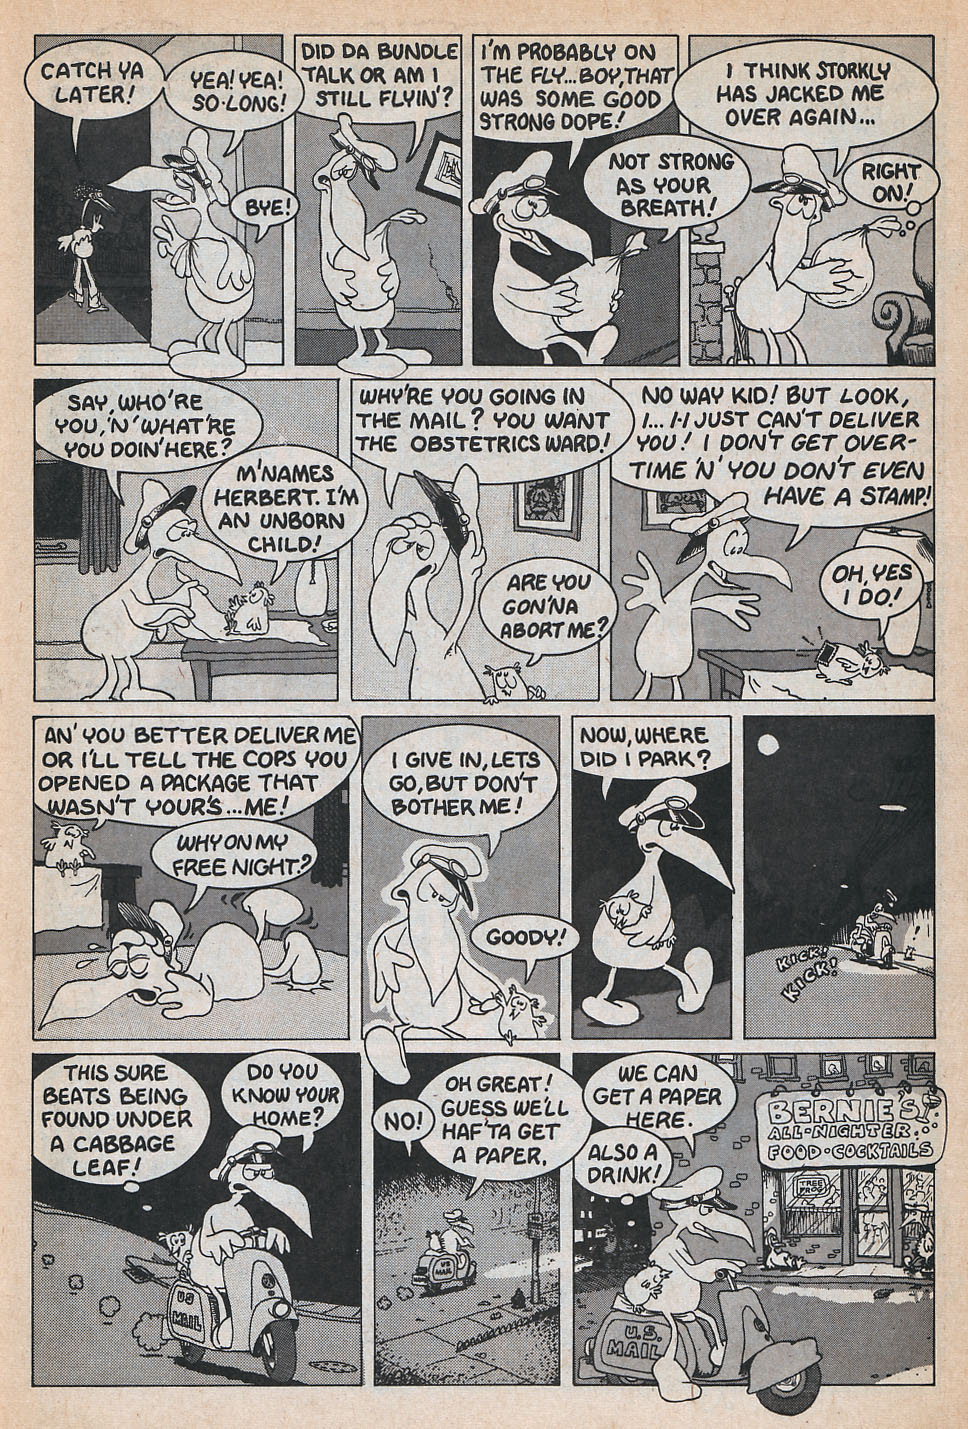 Read online Snarf comic -  Issue #3 - 21